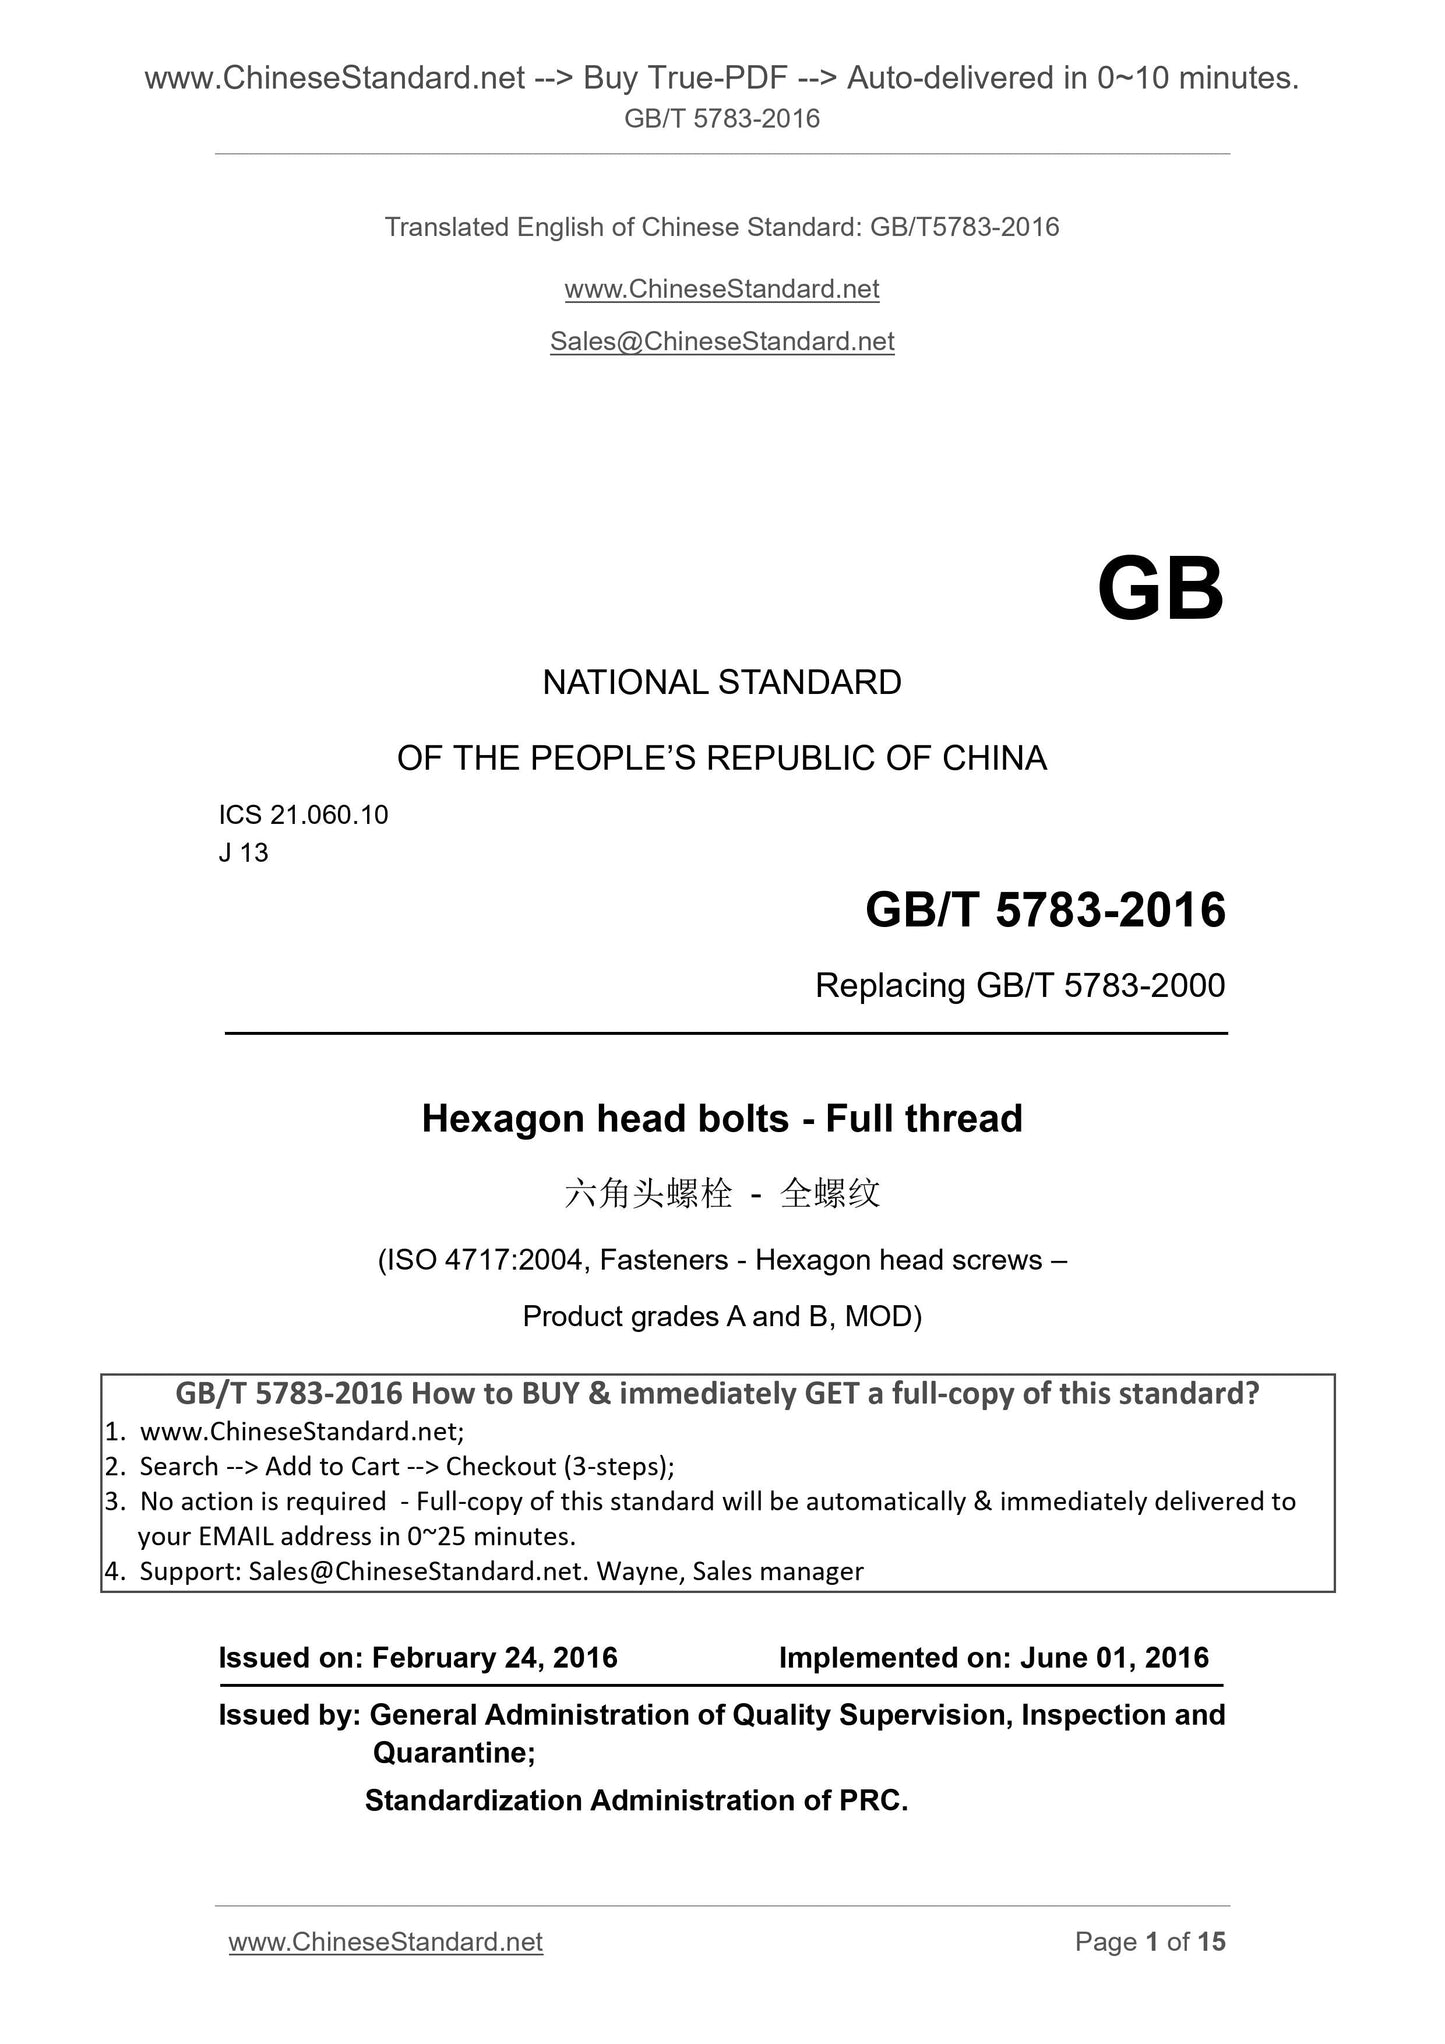 GB/T 5783-2016 Page 1